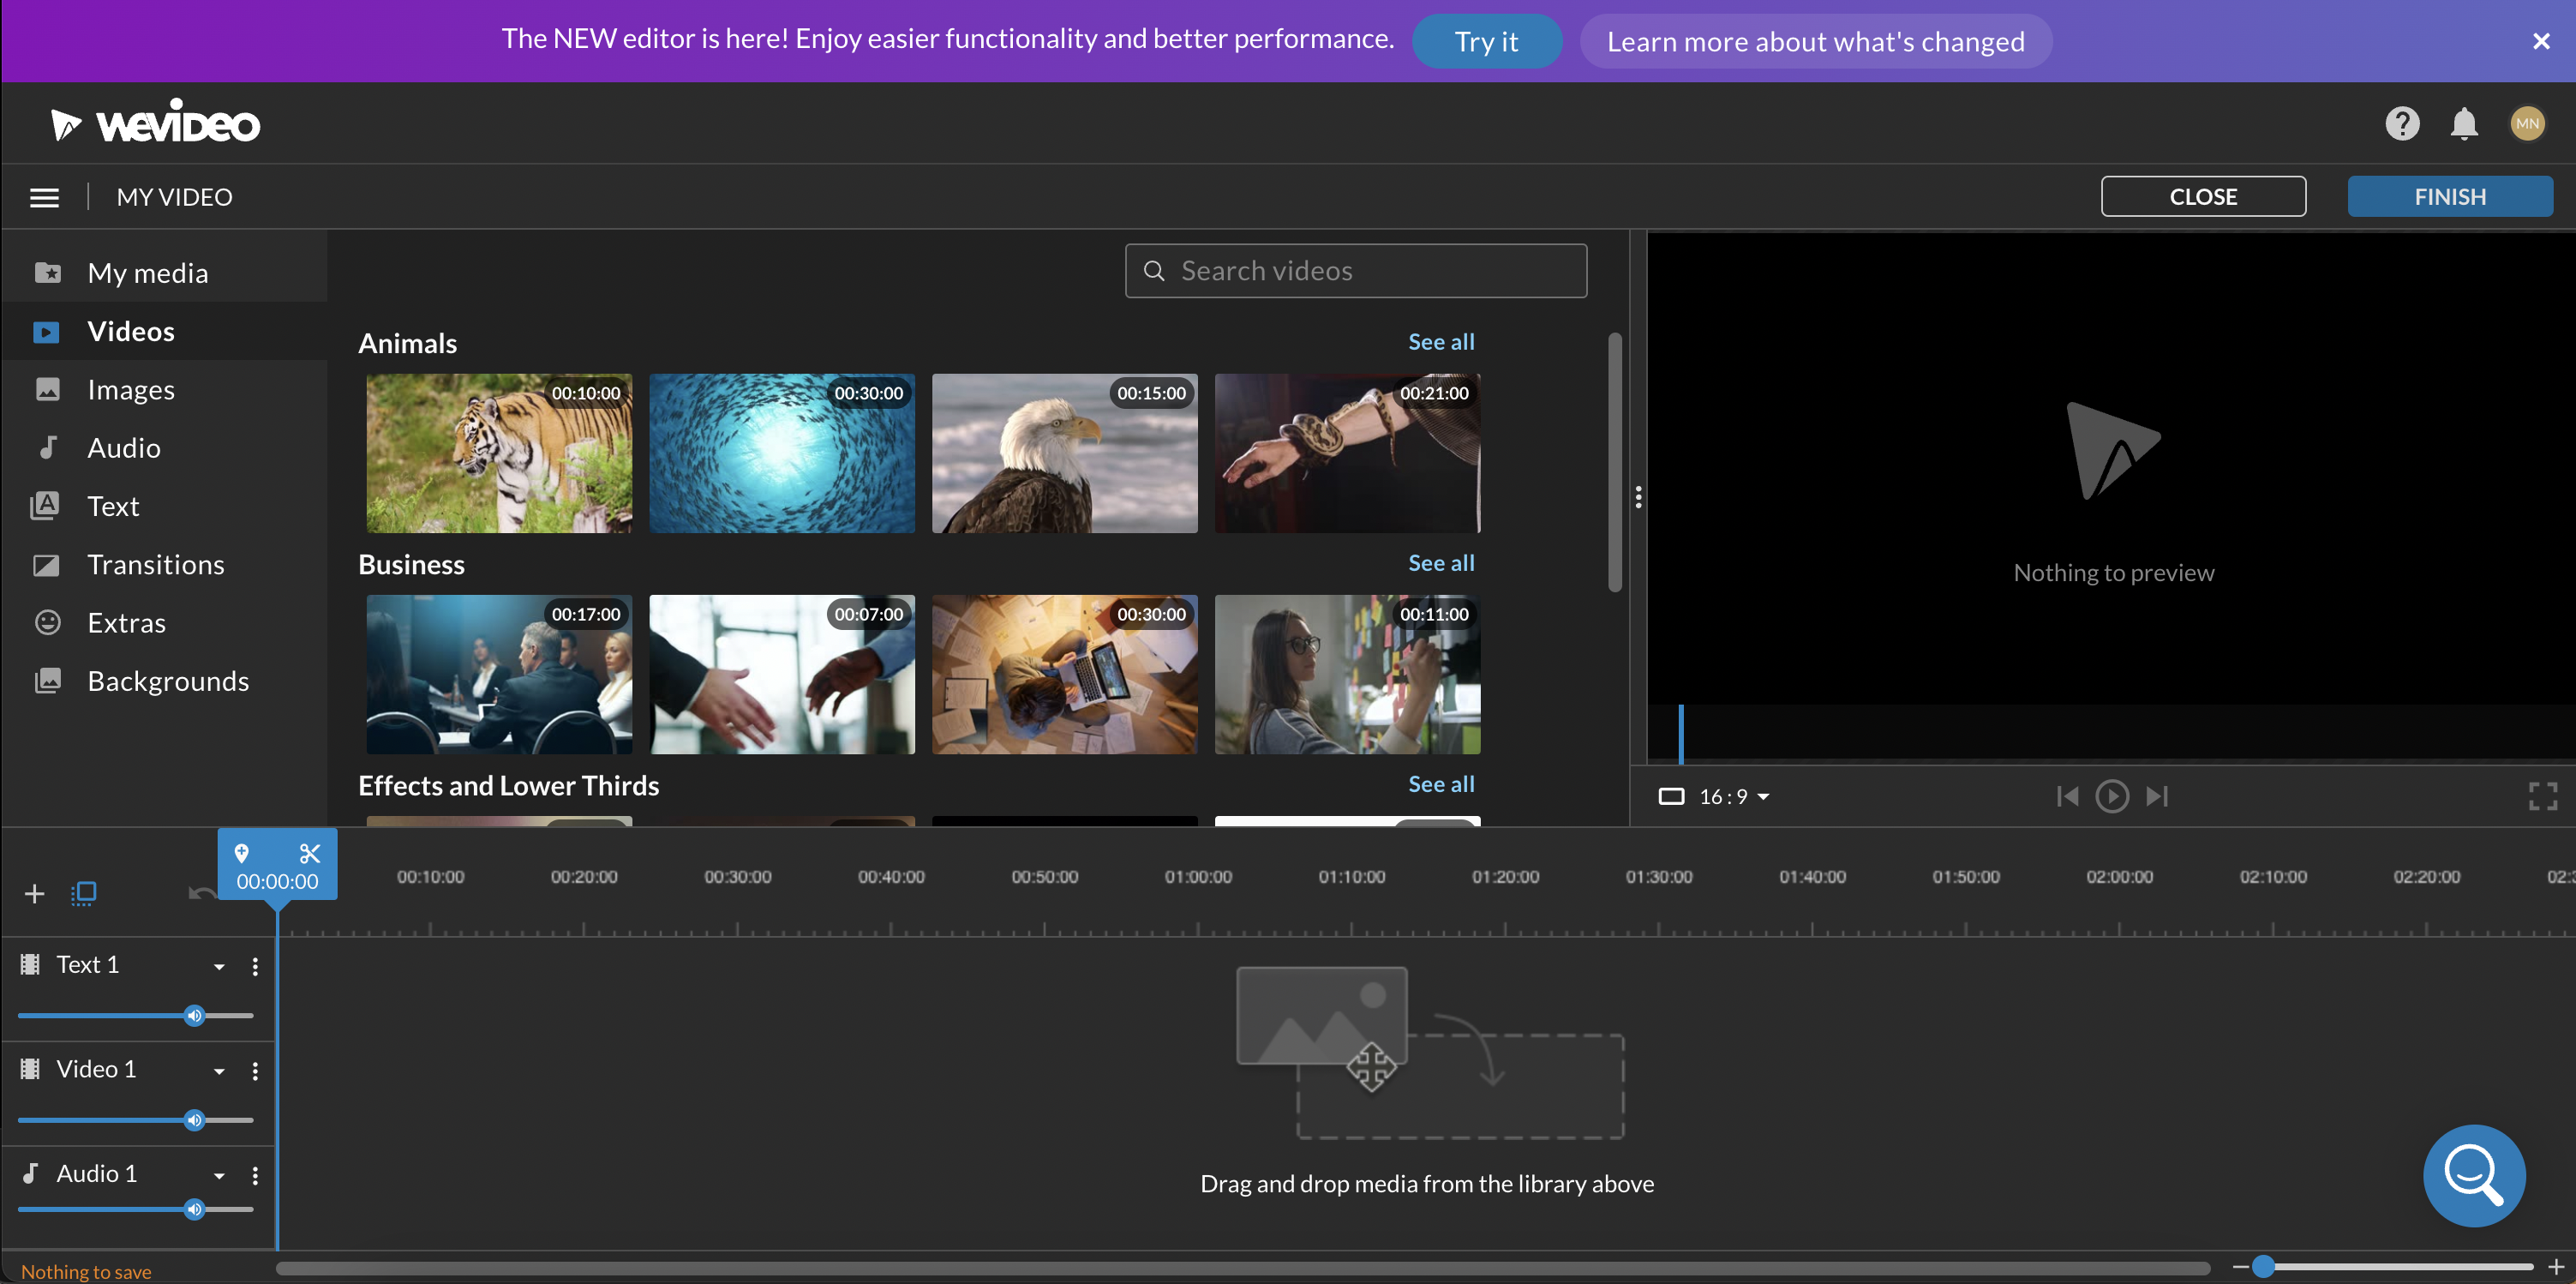 WeVideo Classic editor with announcement banner on top, directing users to try the New editor.